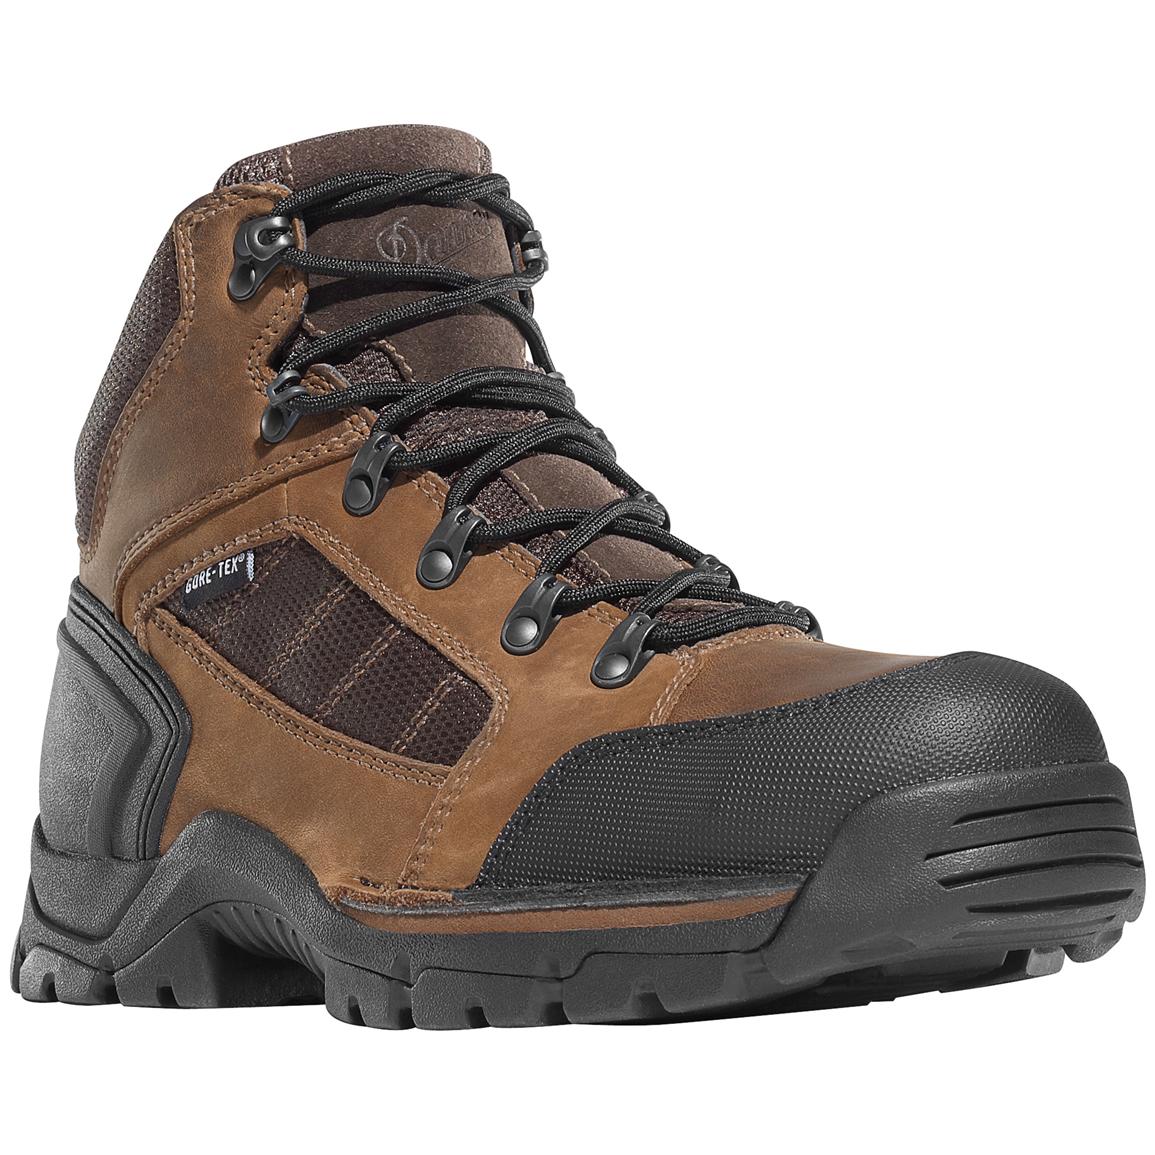 Danner boots clearance - Lookup BeforeBuying